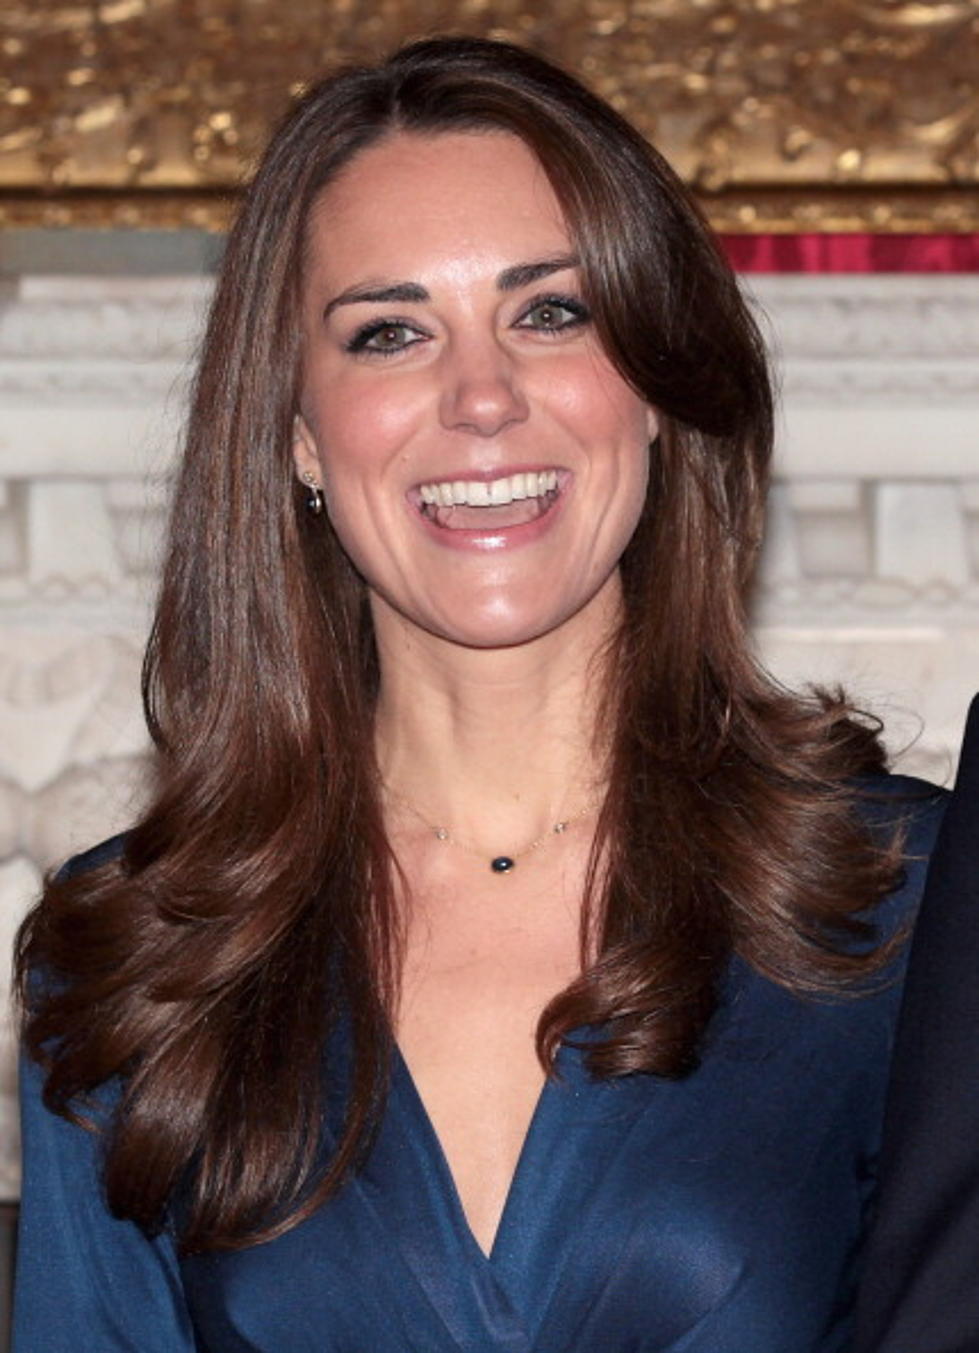 Who Should Play Kate Middleton In Lifetime Movie?